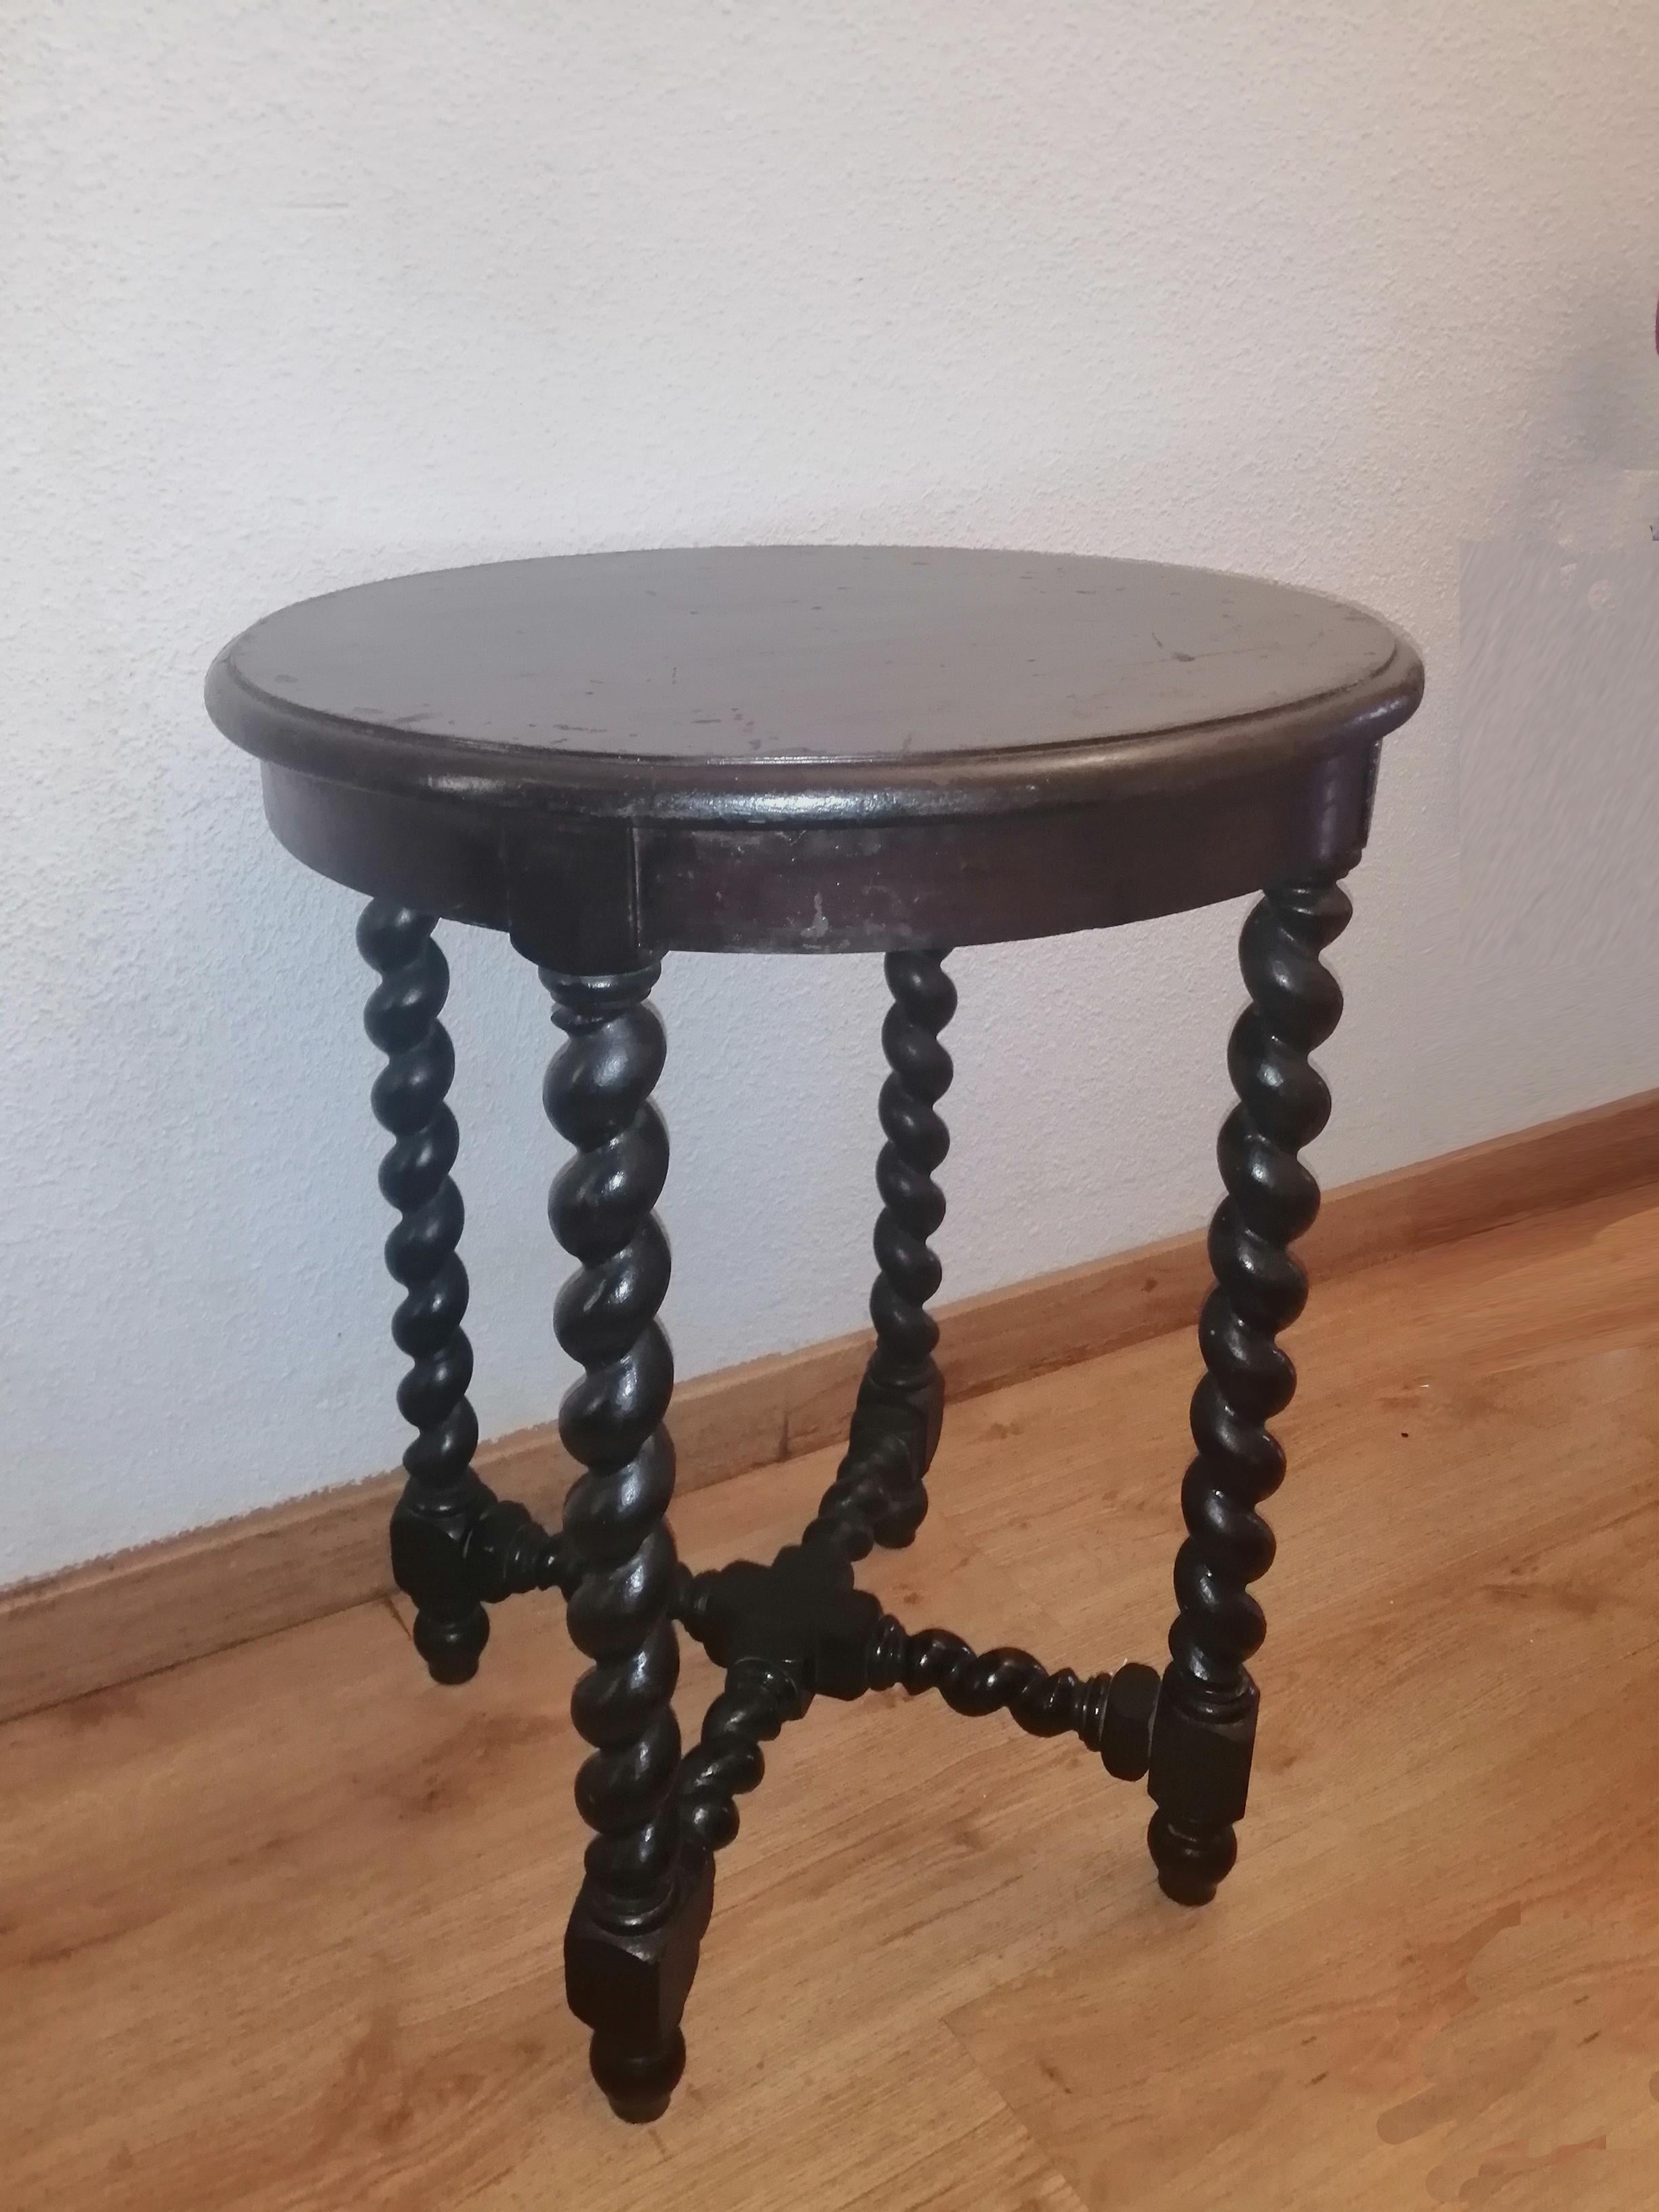 Round table antique of the 19th century. Wood with features barley twist legs 

This table  is higher than the auxiliary tables of the same style, it is the height of a table of ordinary size, type table.Compare in the last photo

This table is